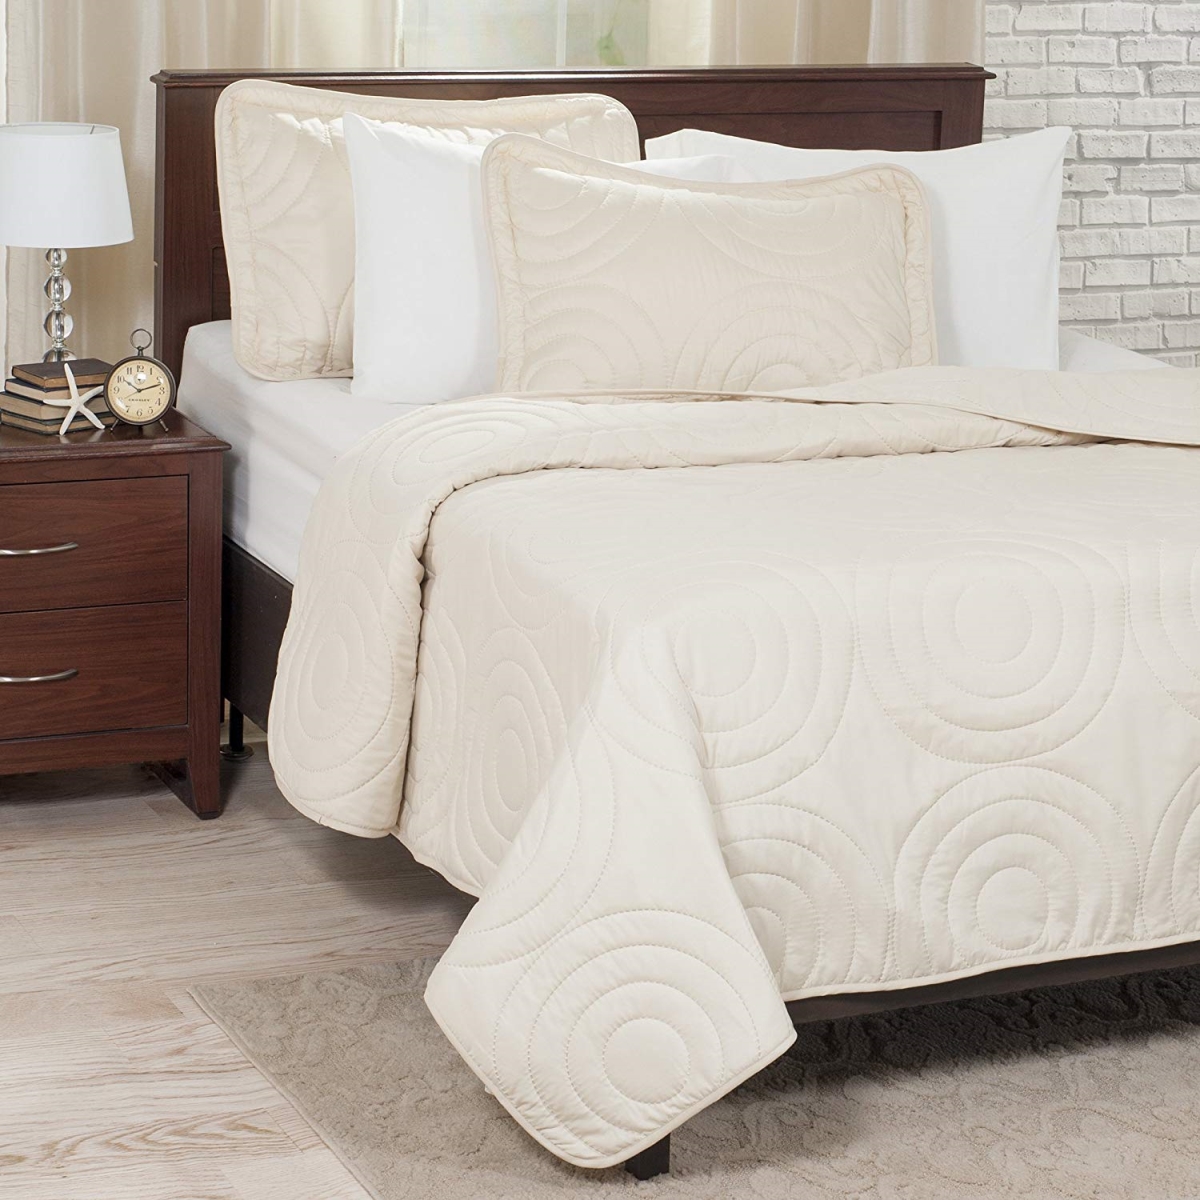 66a-01912 Solid Embossed 3 Piece Quilt Set - Full & Queen Size - Ivory